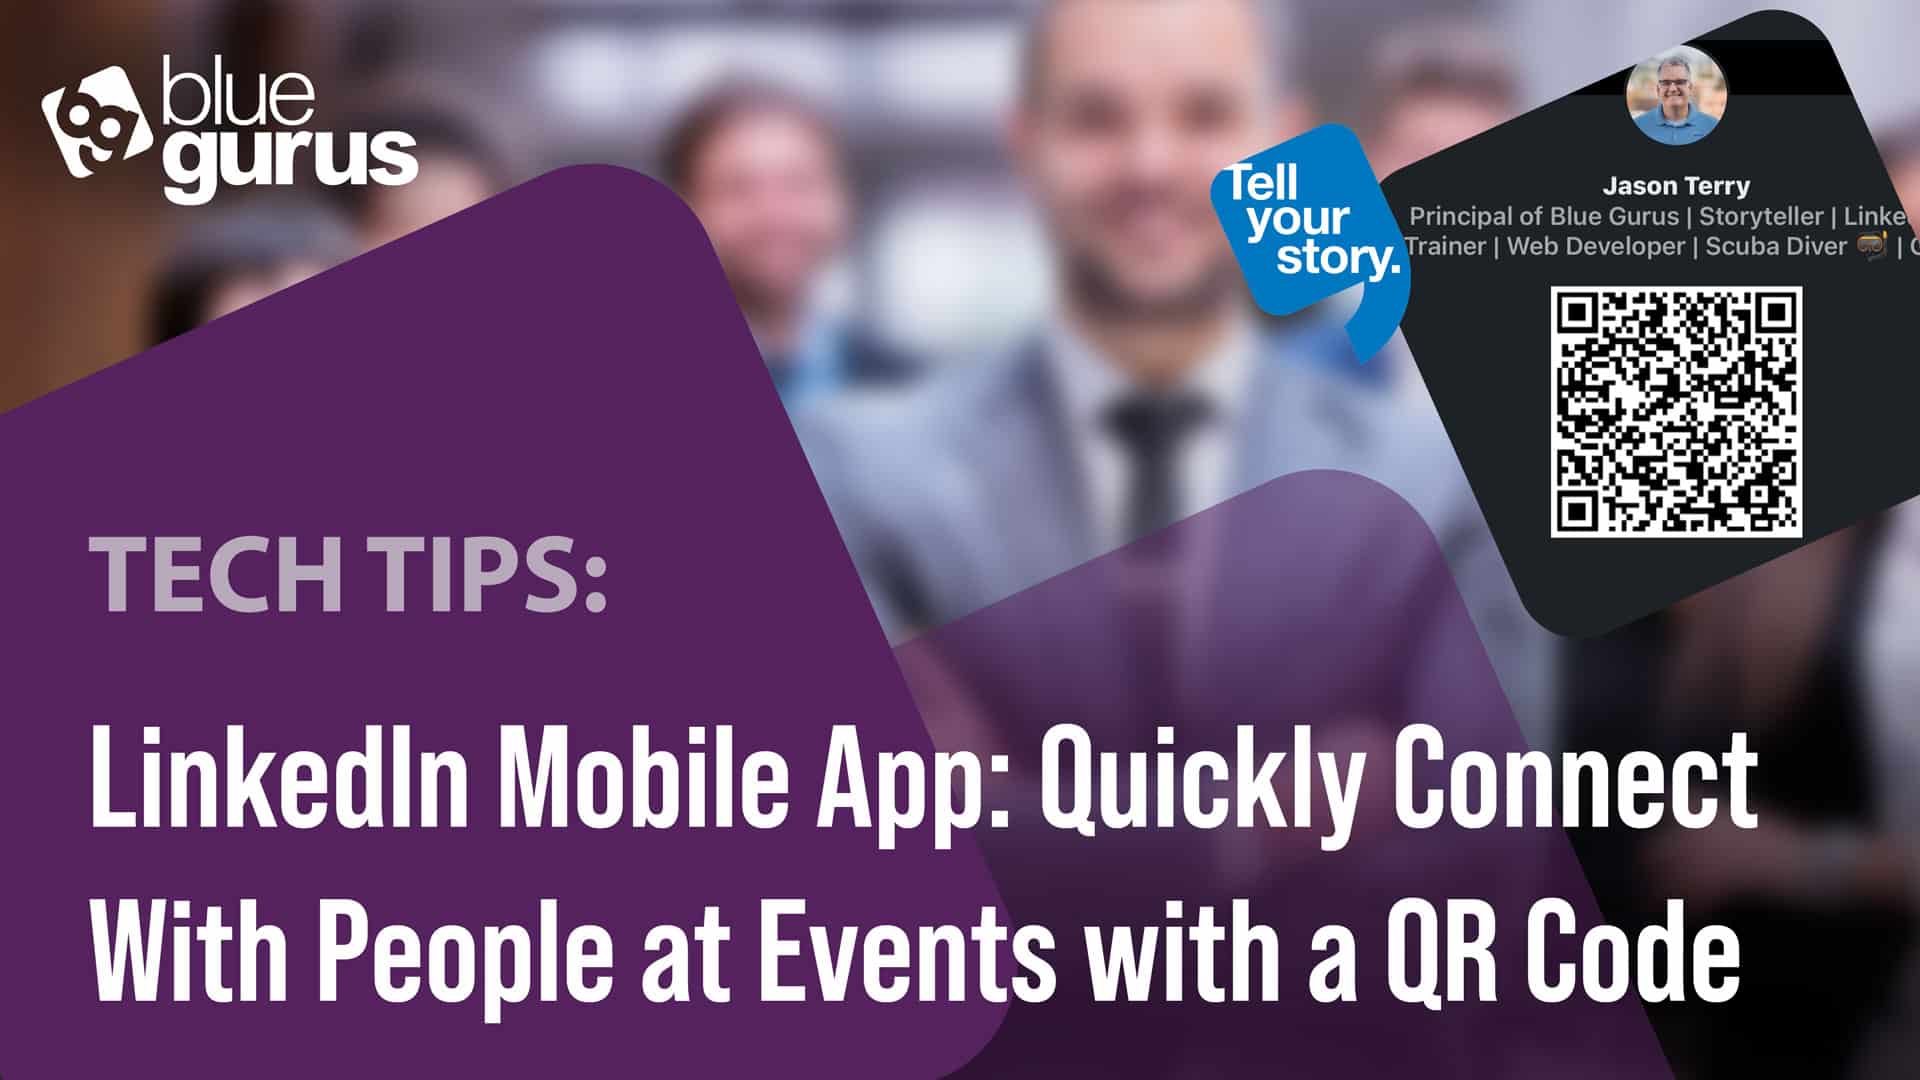 Using the LinkedIn mobile app to quickly connect with people at networking events.